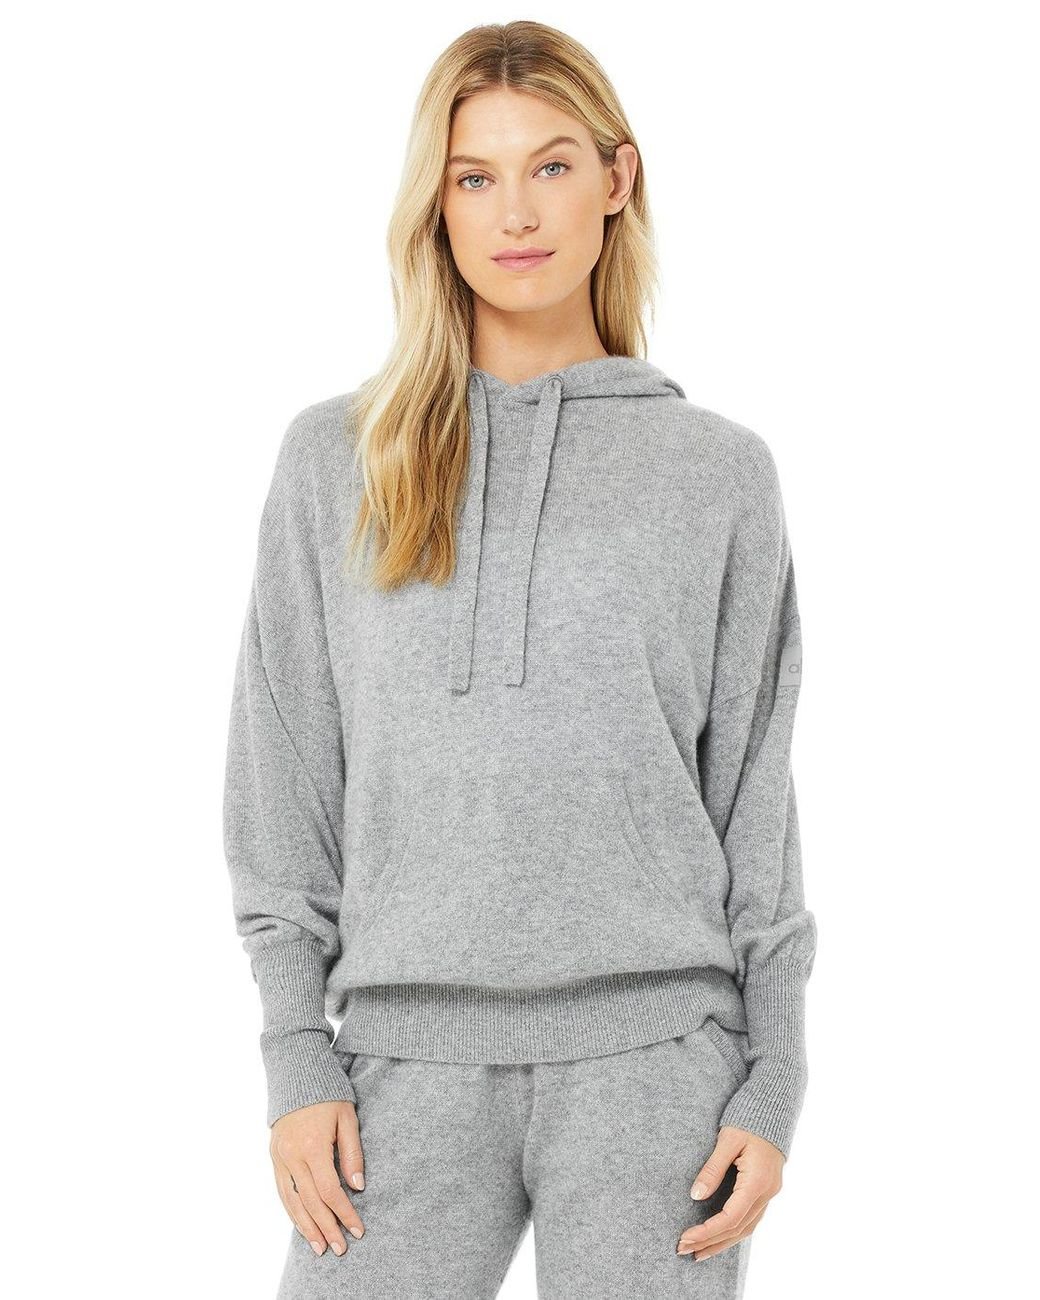 Alo Yoga Alo Yoga Cashmere Jet Set Hoodie in Gray - Lyst